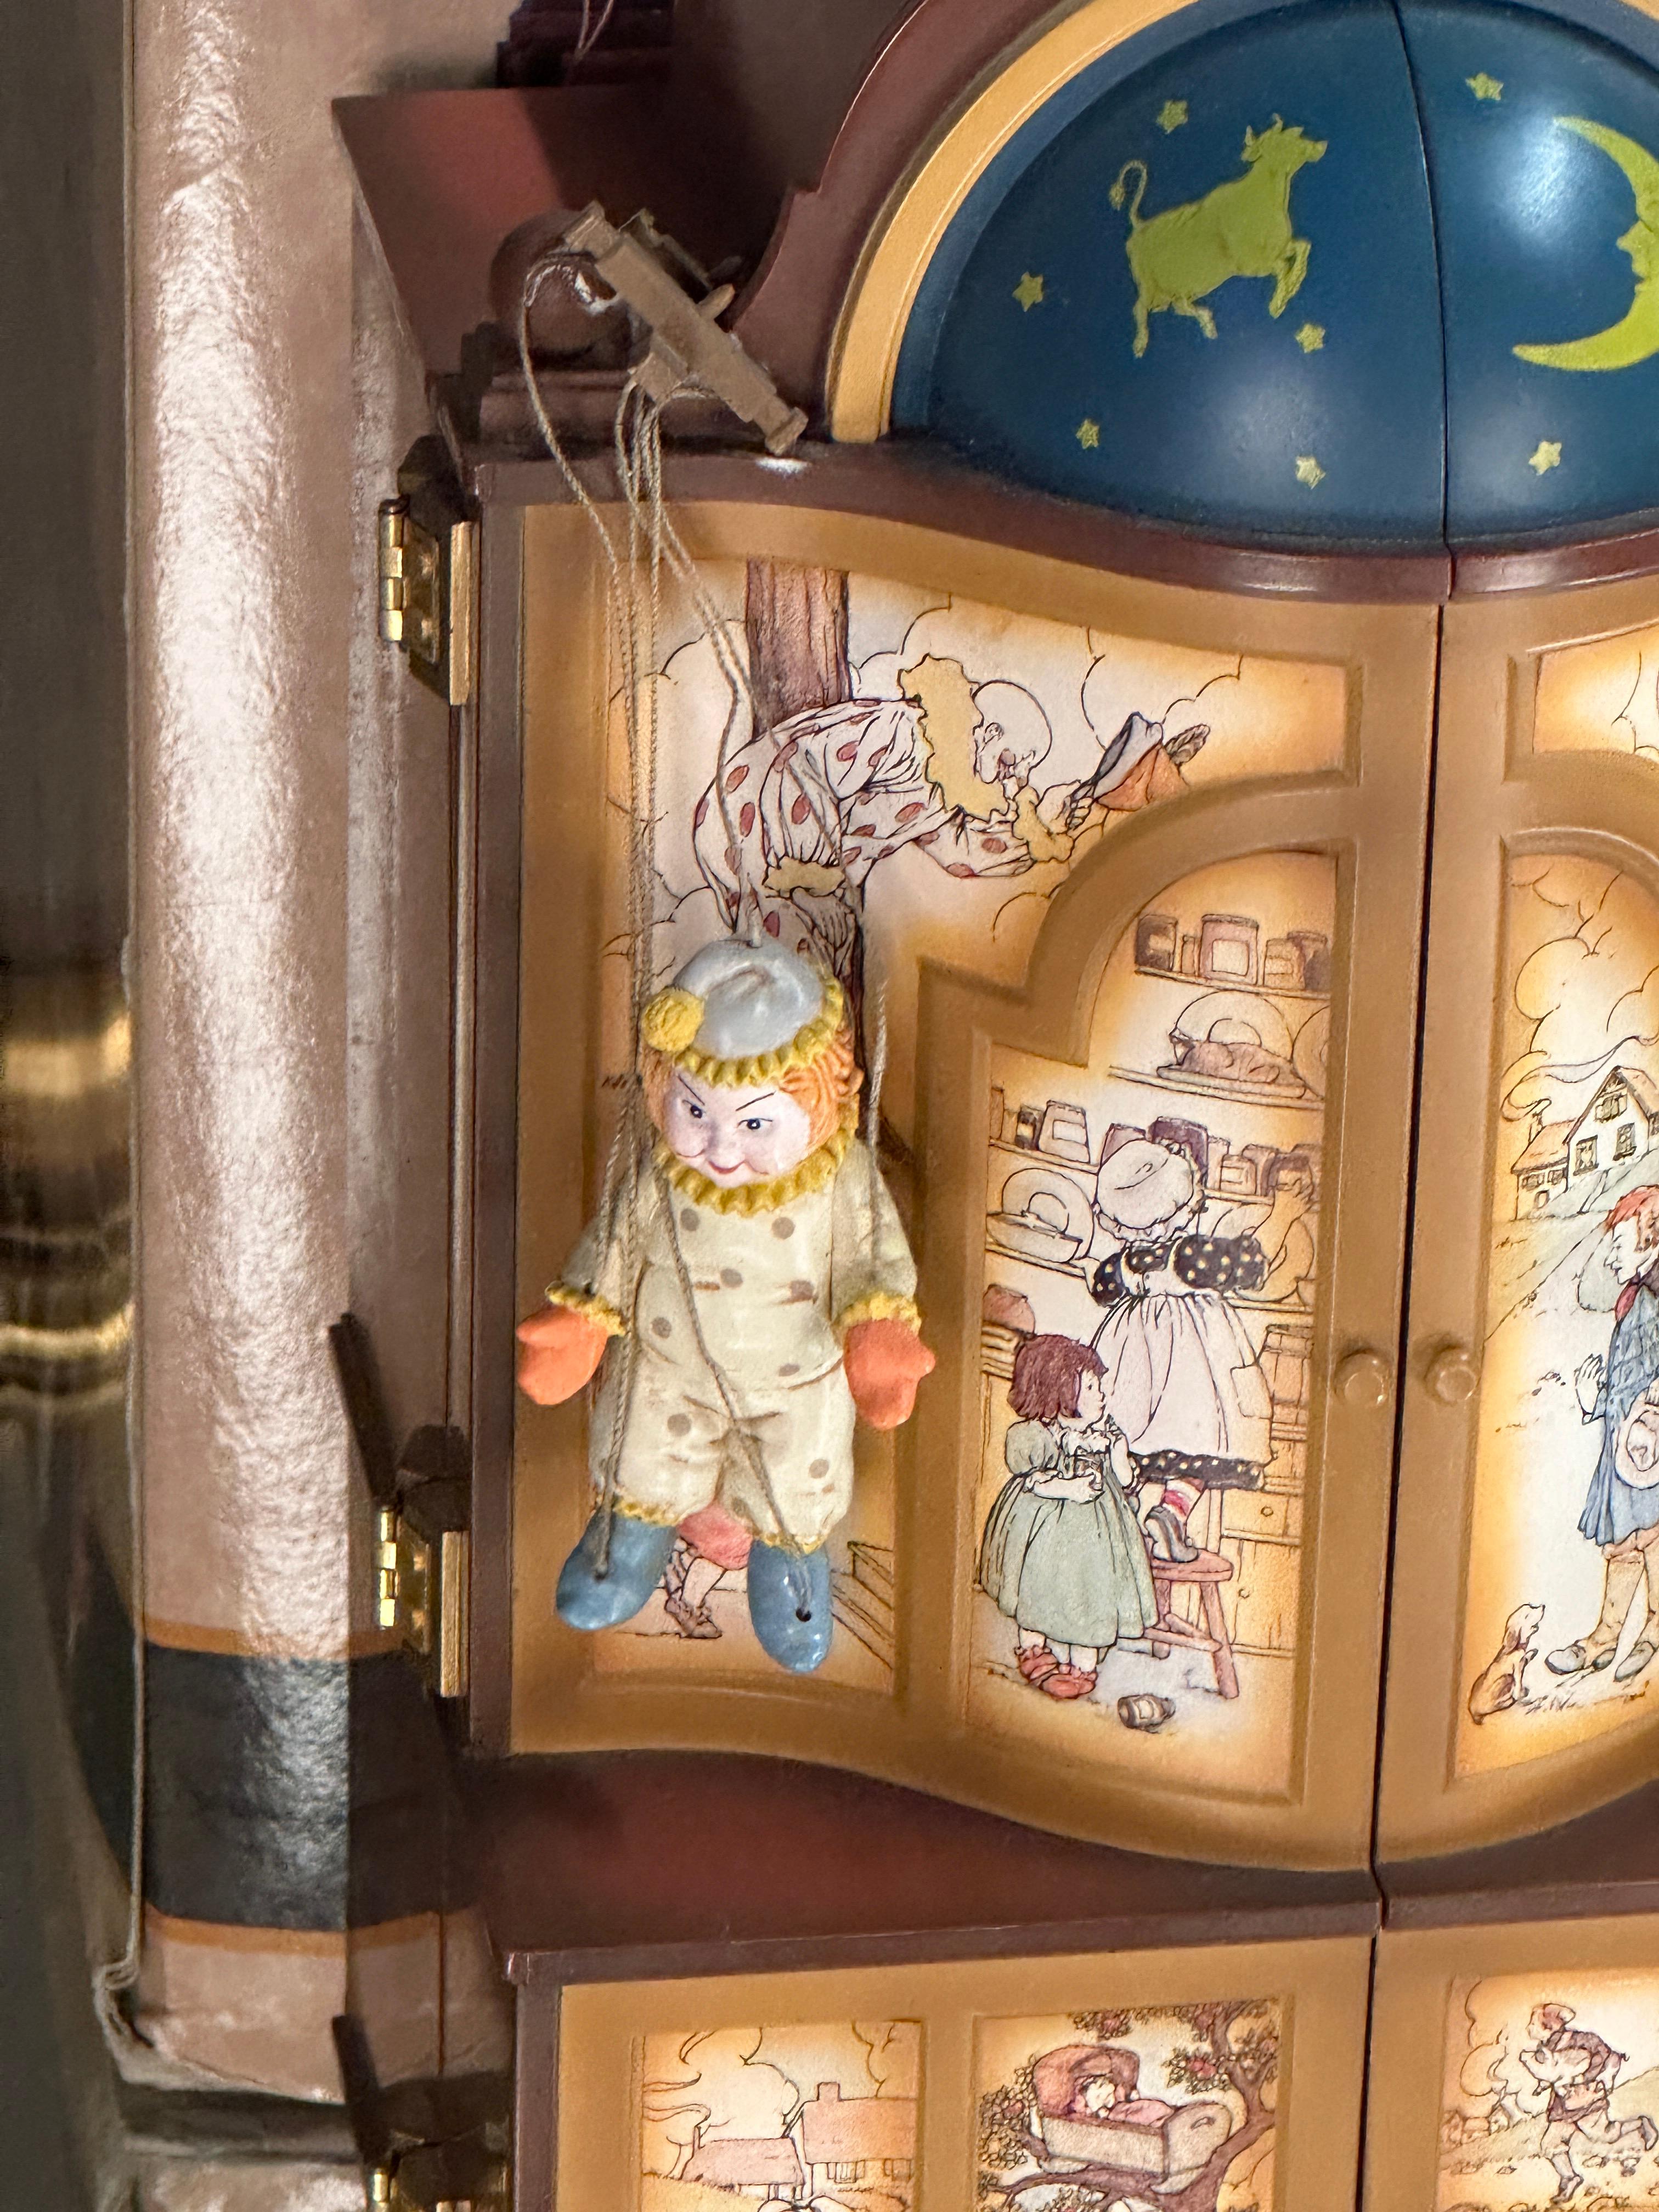 THE DREAM KEEPER Deluxe Toy Cabinet Action Musical